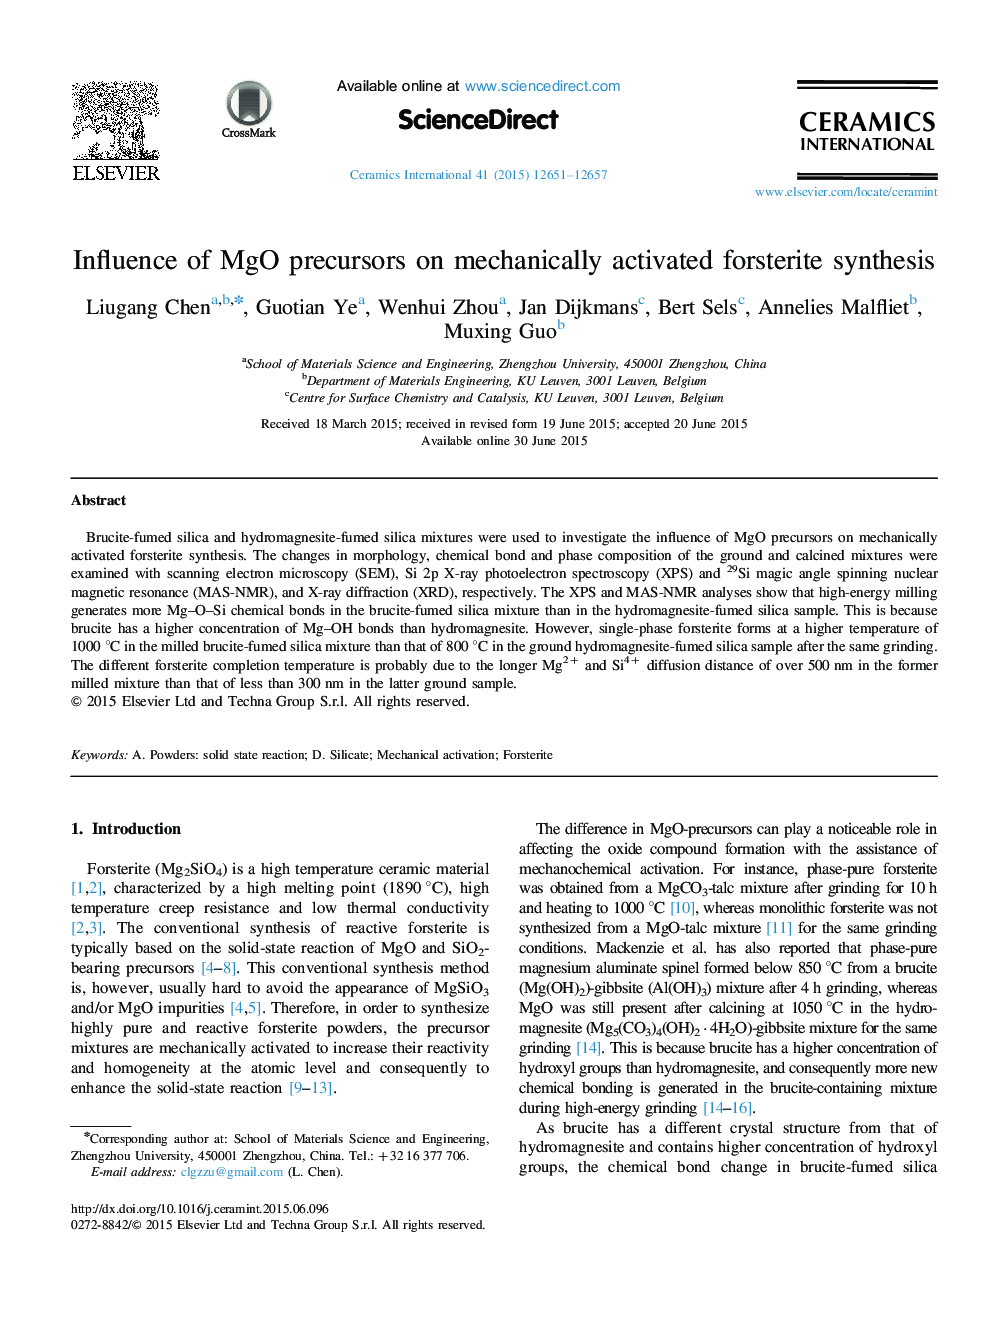 Influence of MgO precursors on mechanically activated forsterite synthesis